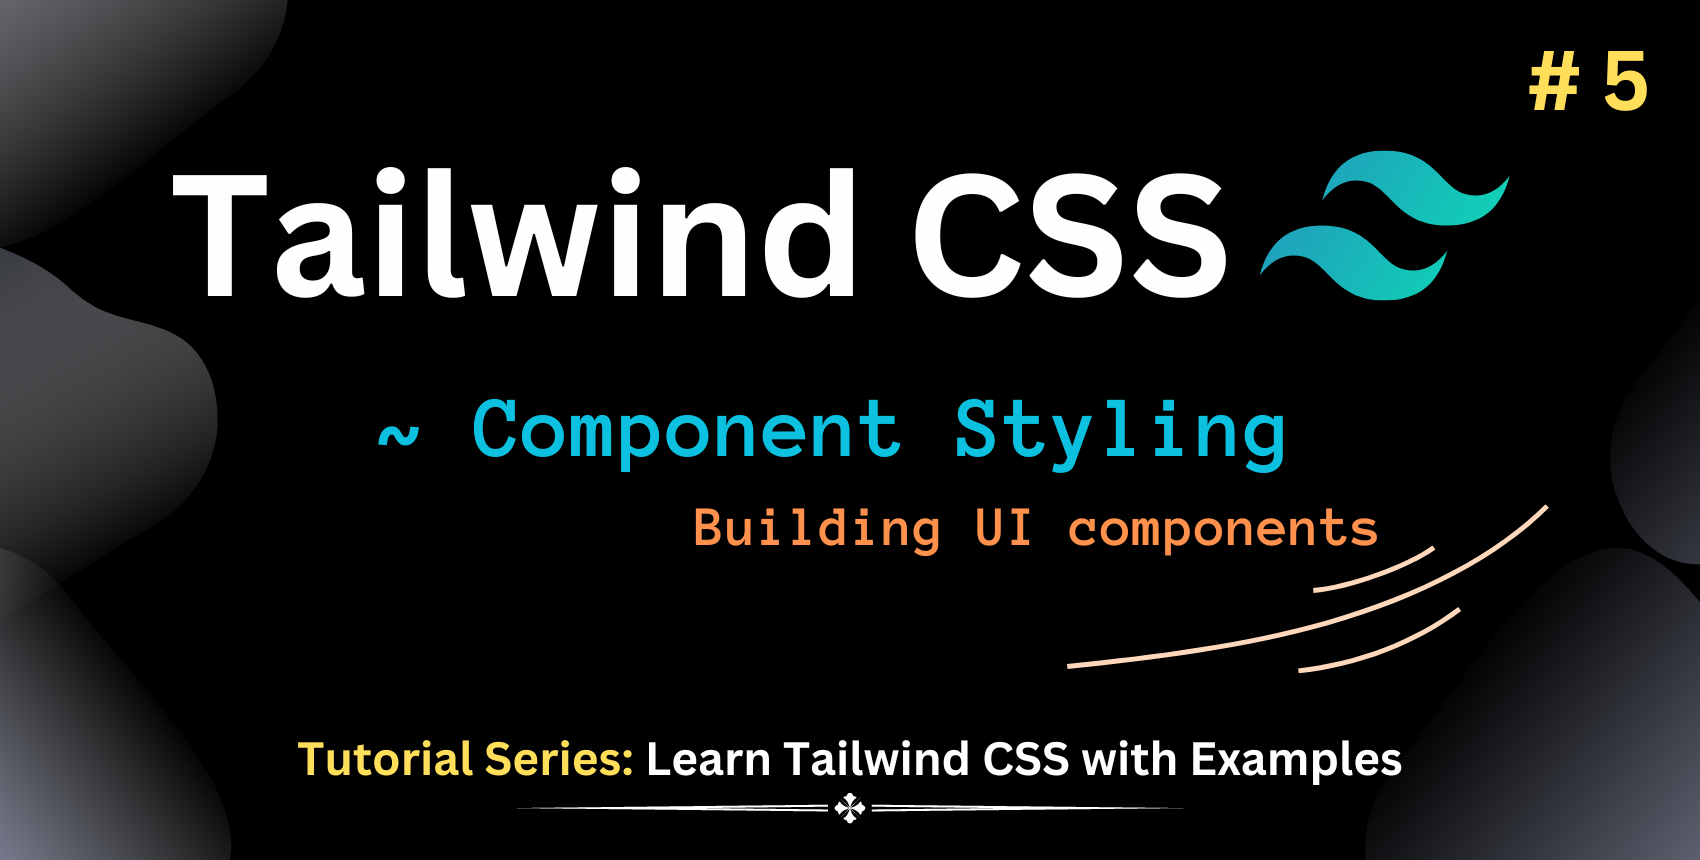 Learn Tailwind CSS: Component Styling and Building common UI components 